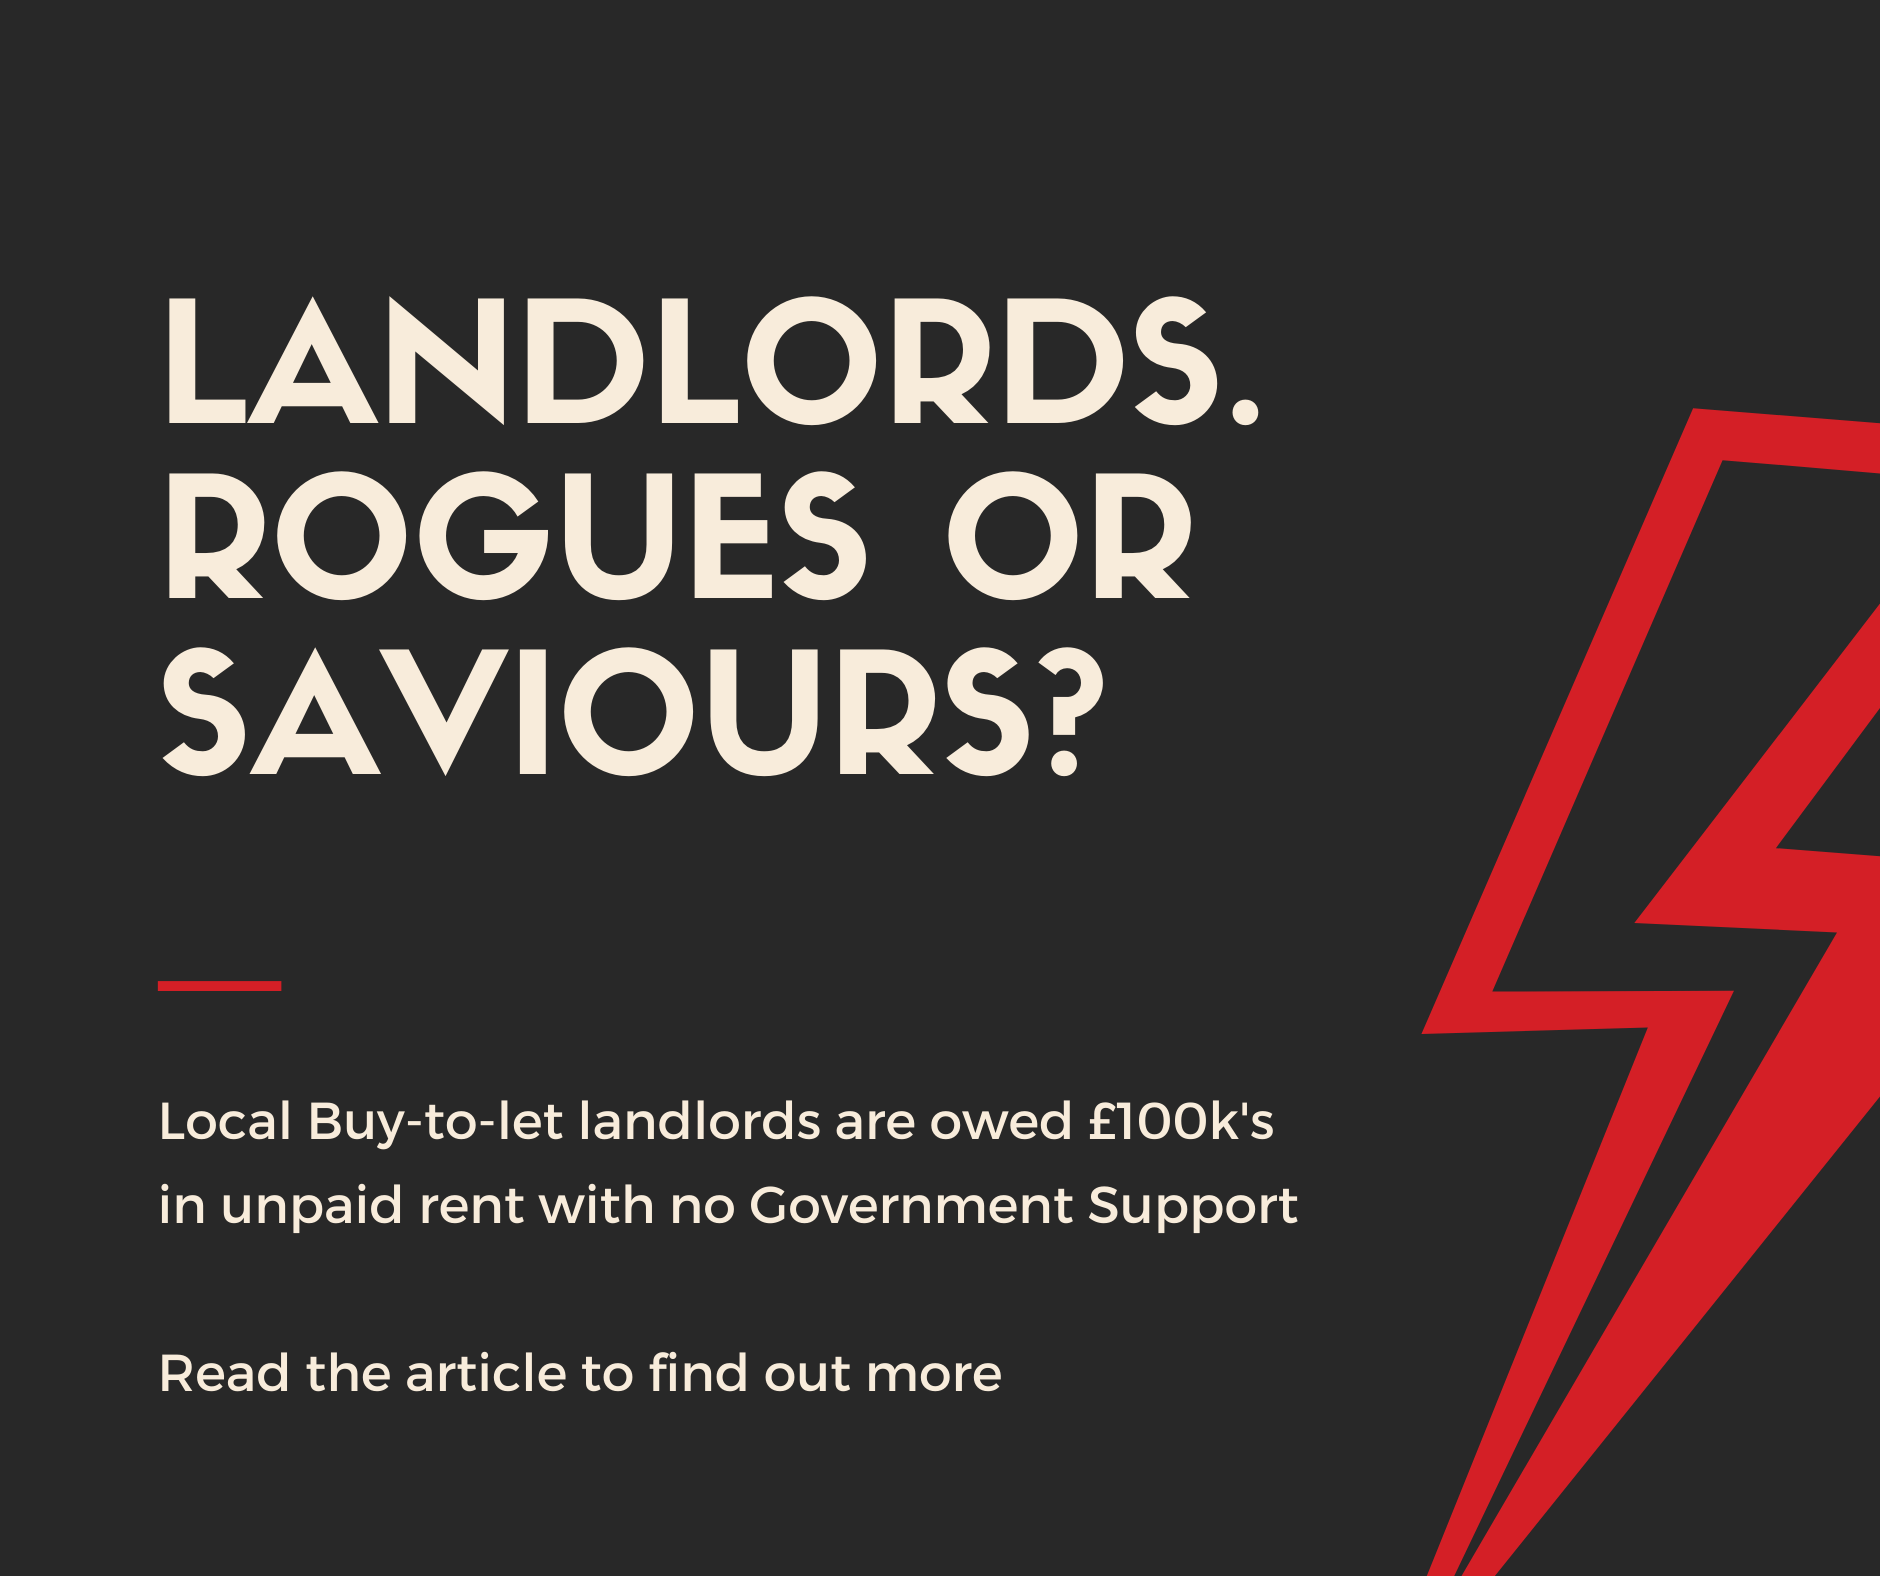 ISLEWORTH BUY-TO-LET LANDLORDS OWED £889,138 IN UNPAID RENT. ROGUES OR SAVIOURS?